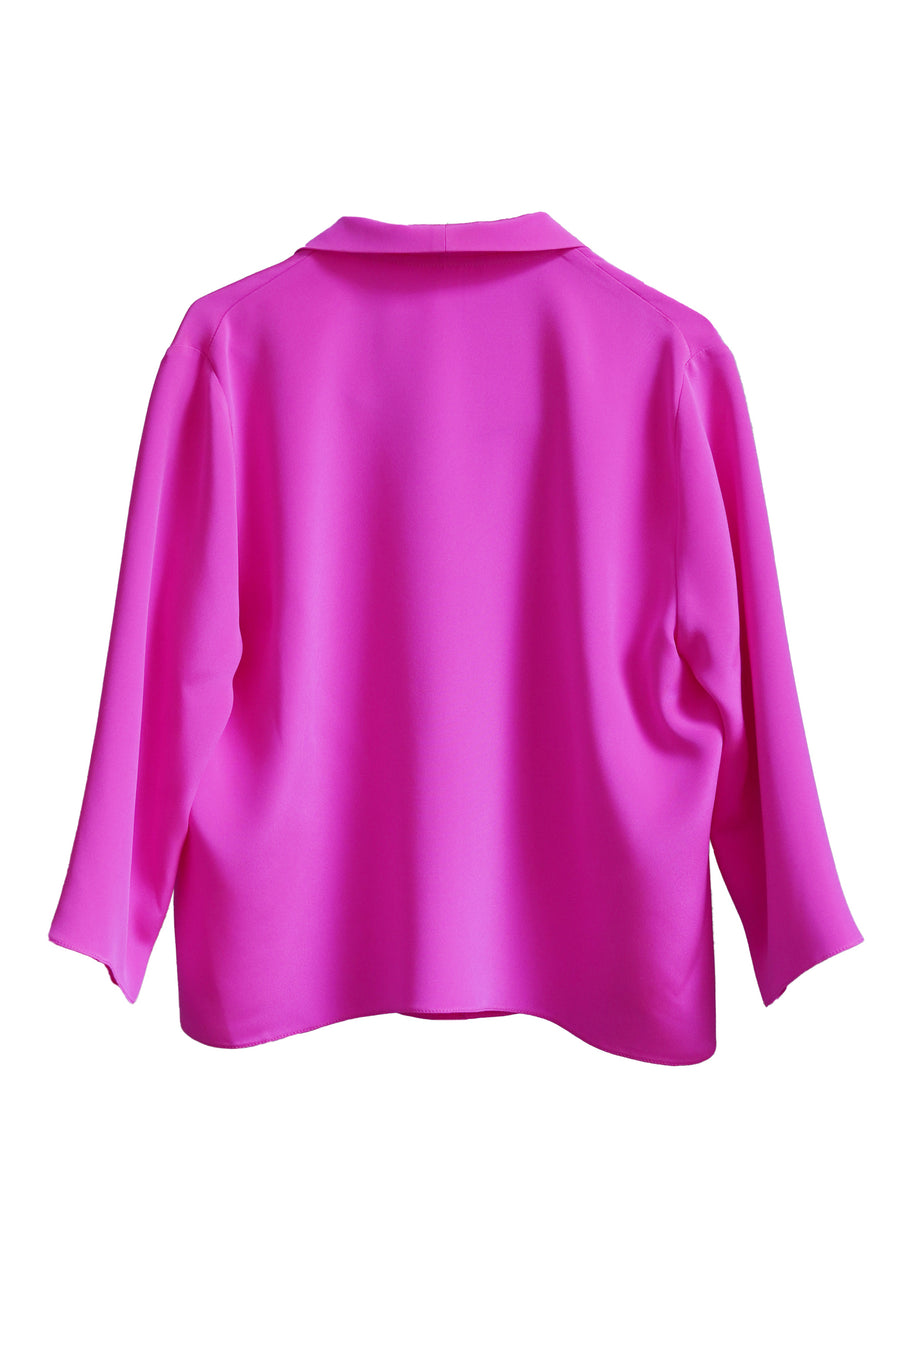 Hot Pink Silk 3/4 Sleeve Square Front Frolic Top